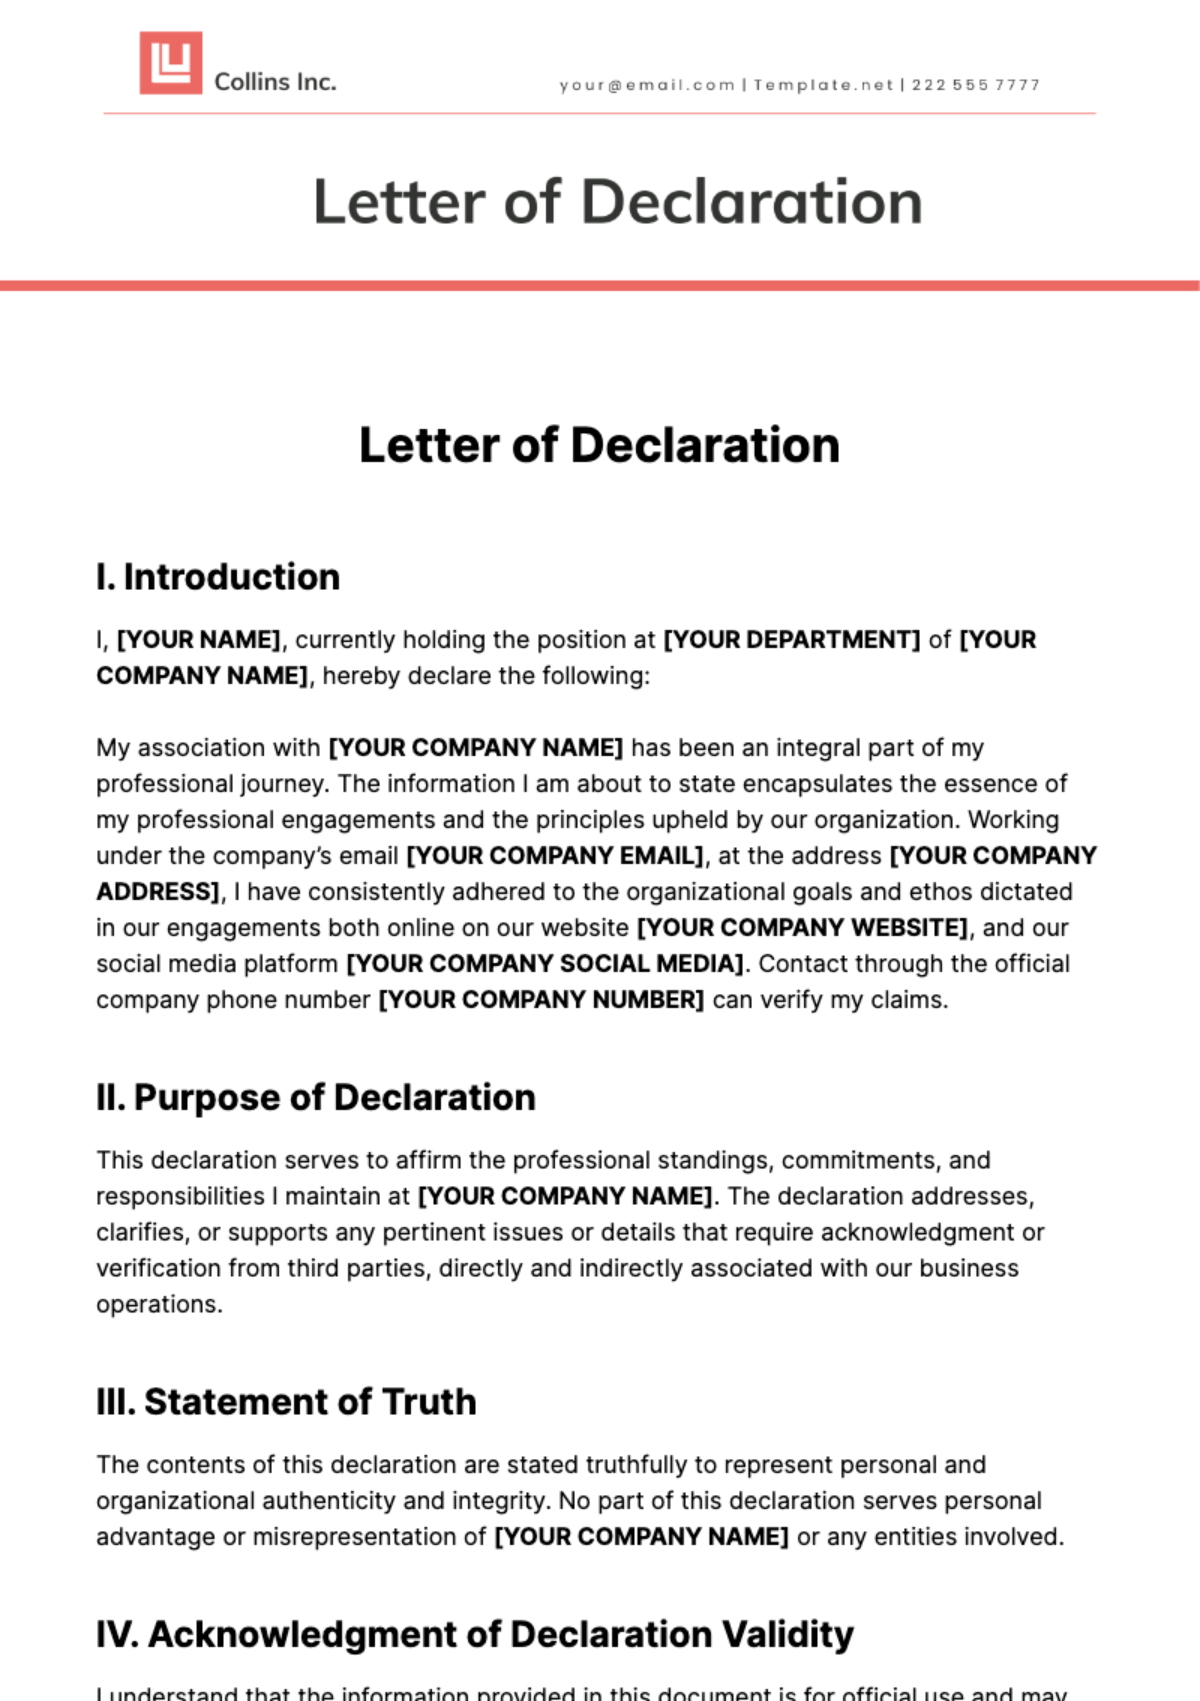 Letter of Declaration Template